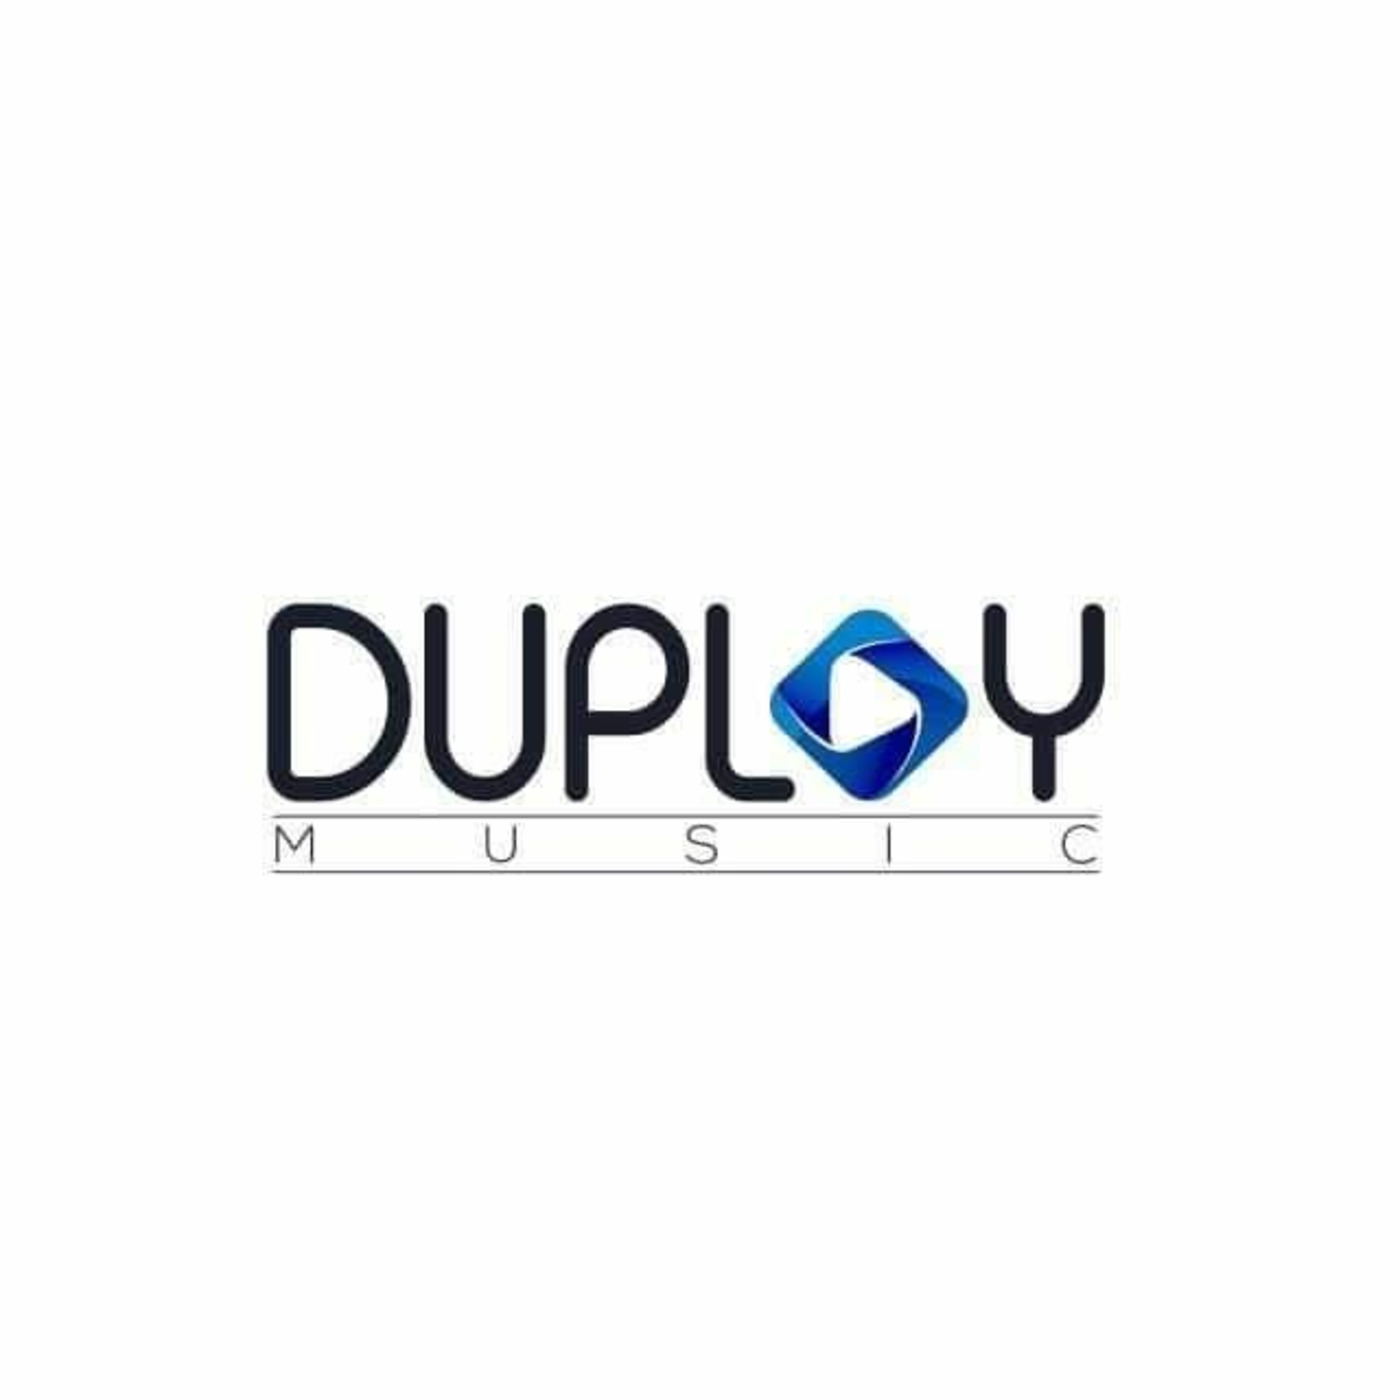 DUPLAY MUSIC presents PERCEPTIONS blended by DUPLEIX